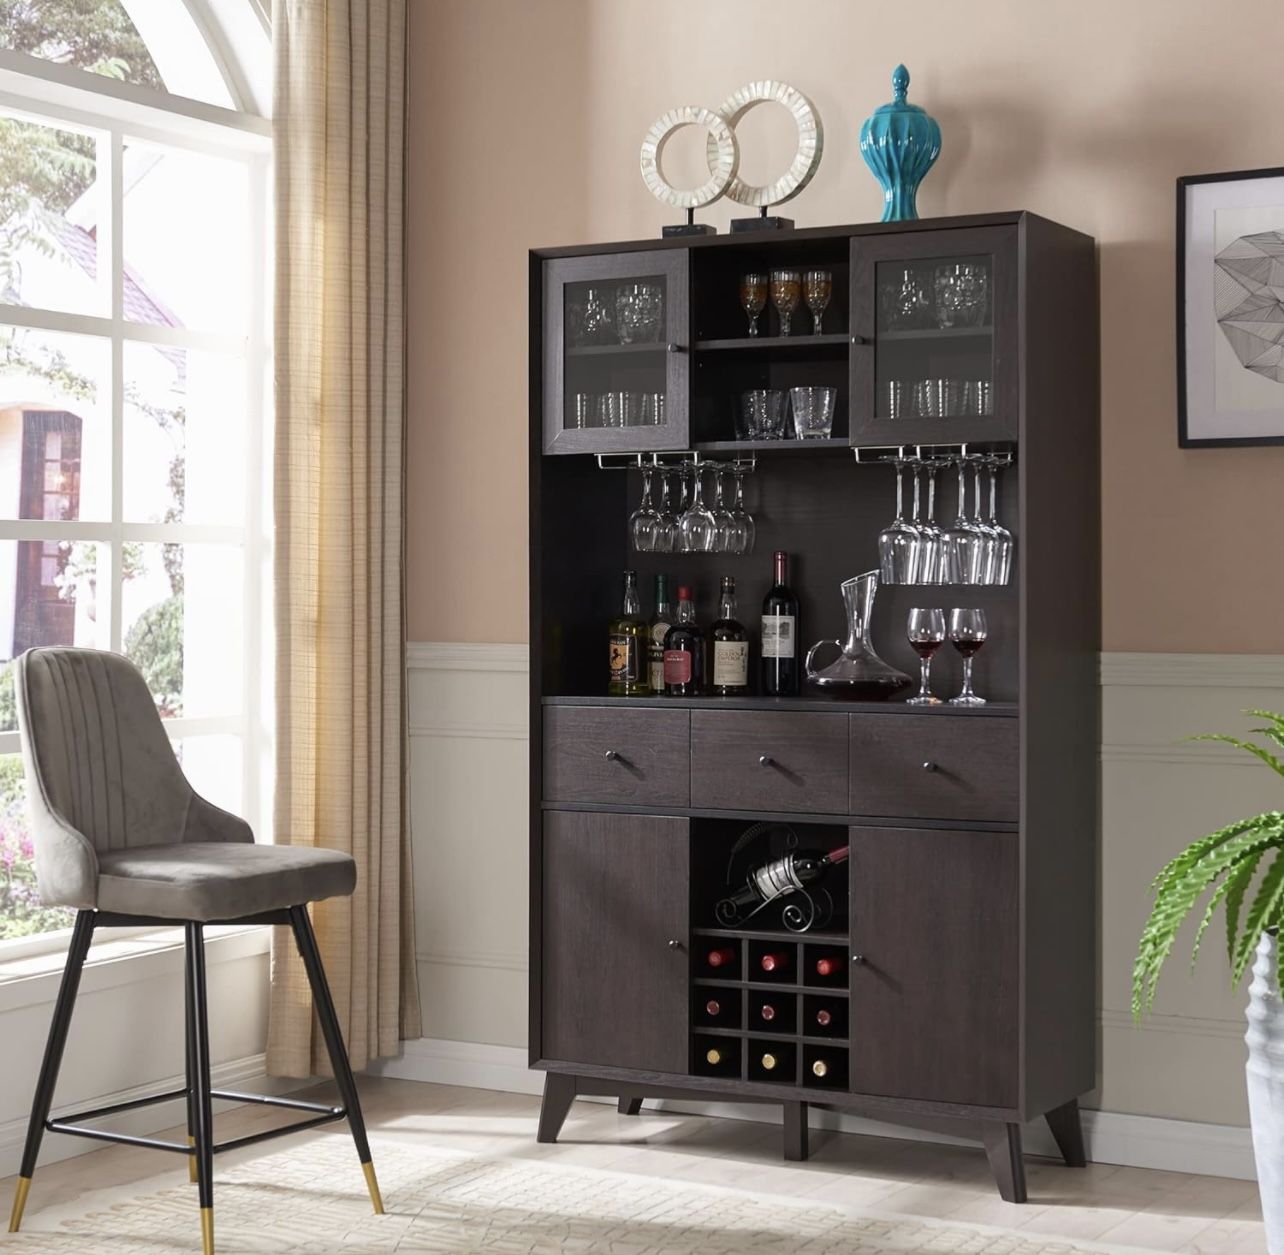 Bar Cabinet, Mid Century Modern Hutch Storage Cabinet with Wine and Glass Rack, Storage Shelves, and Drawers, Buffet Sideboard Cabinet for Home Kitche